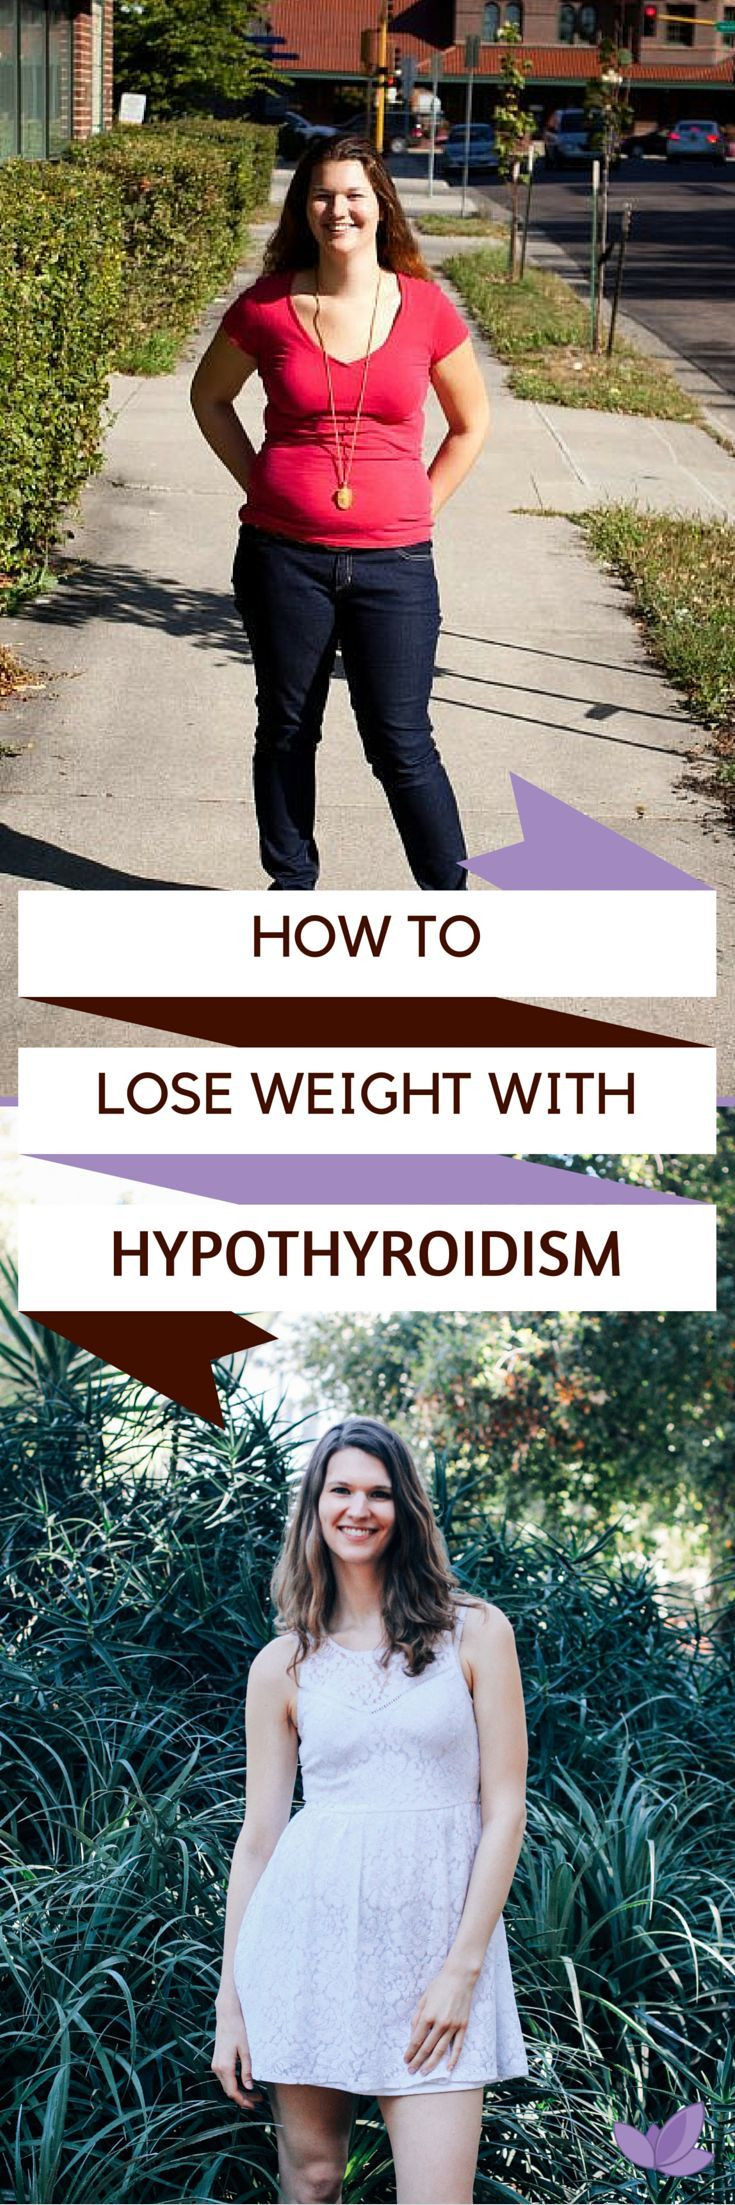 How To Lose Weight With Hypothyroidism
 Pin on Health Tips